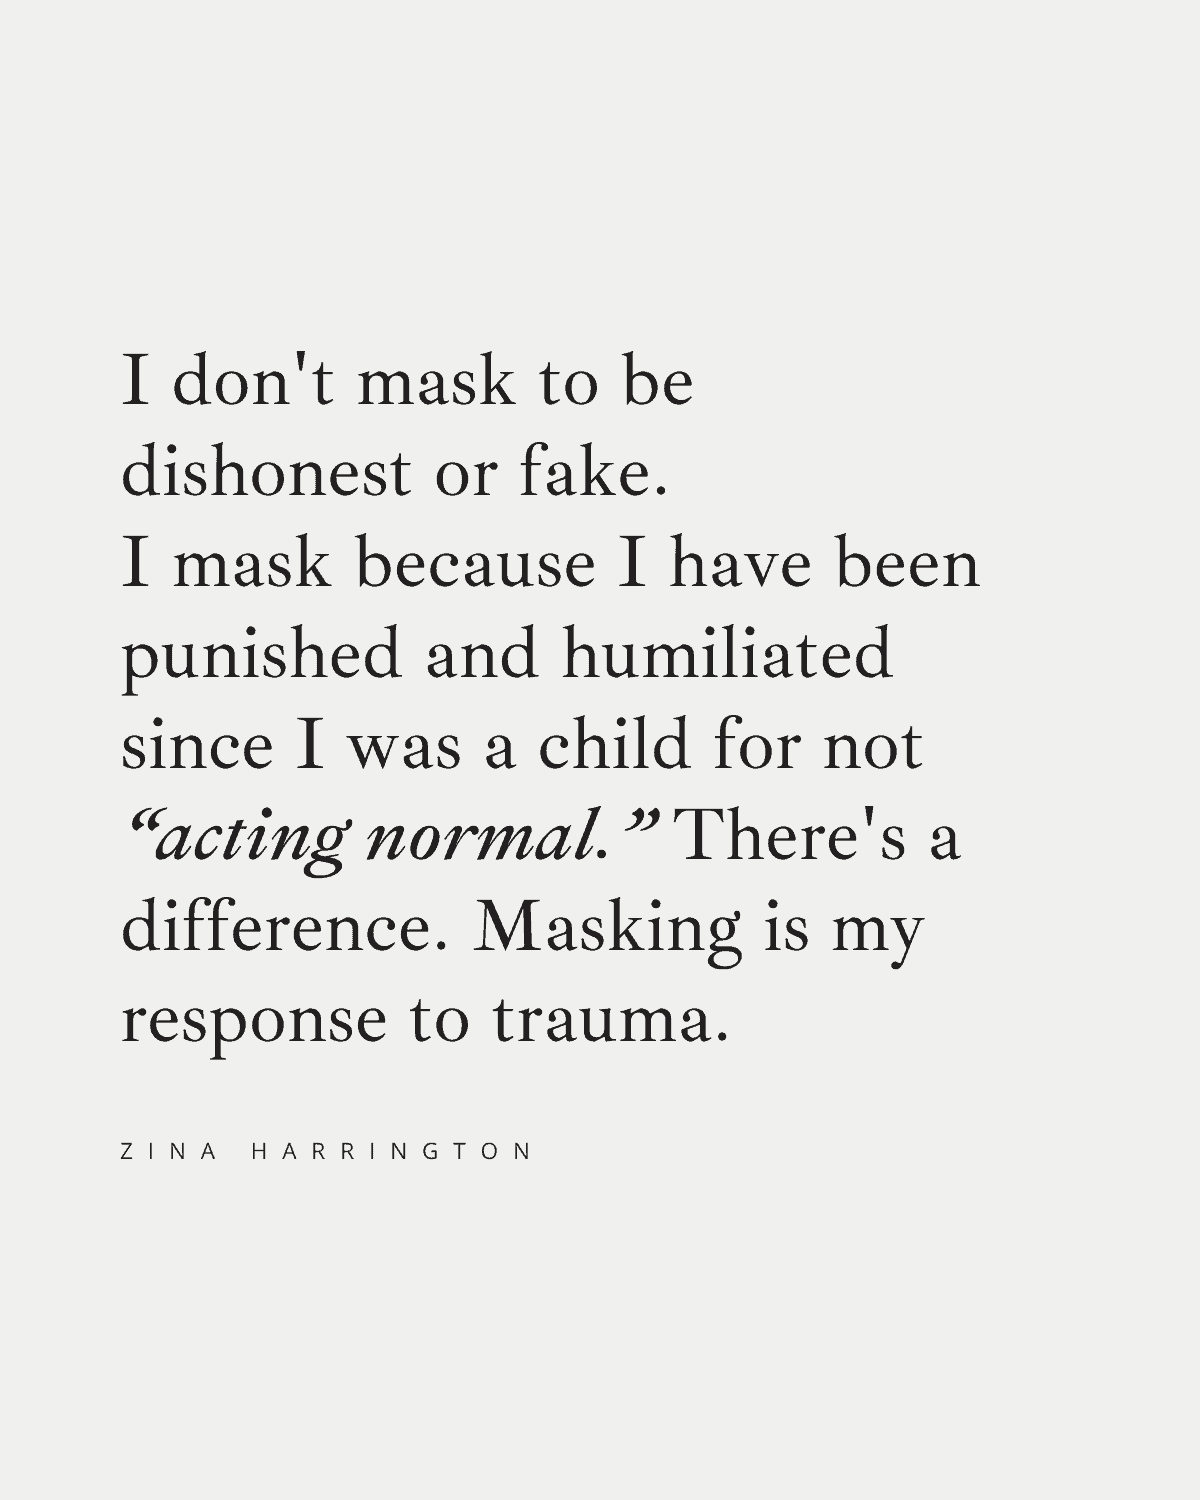 I don't mask to be dishonest or fake. I mask because I have been punished and humiliated since I was a child for not “acting normal.” There's a difference. Masking is my response to trauma.